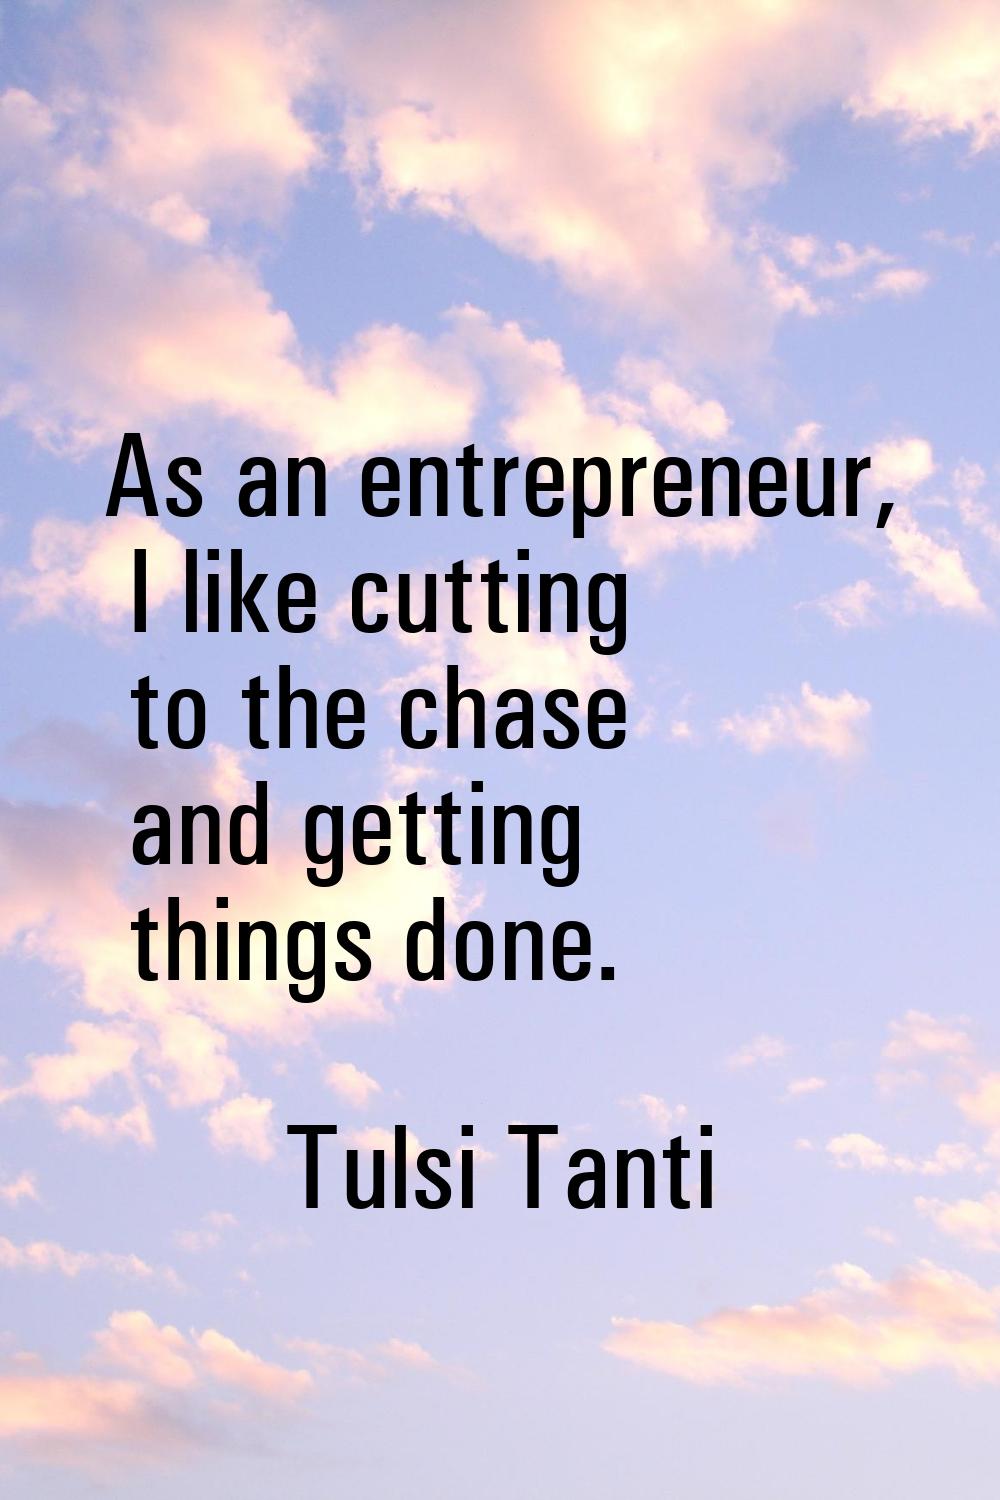 As an entrepreneur, I like cutting to the chase and getting things done.